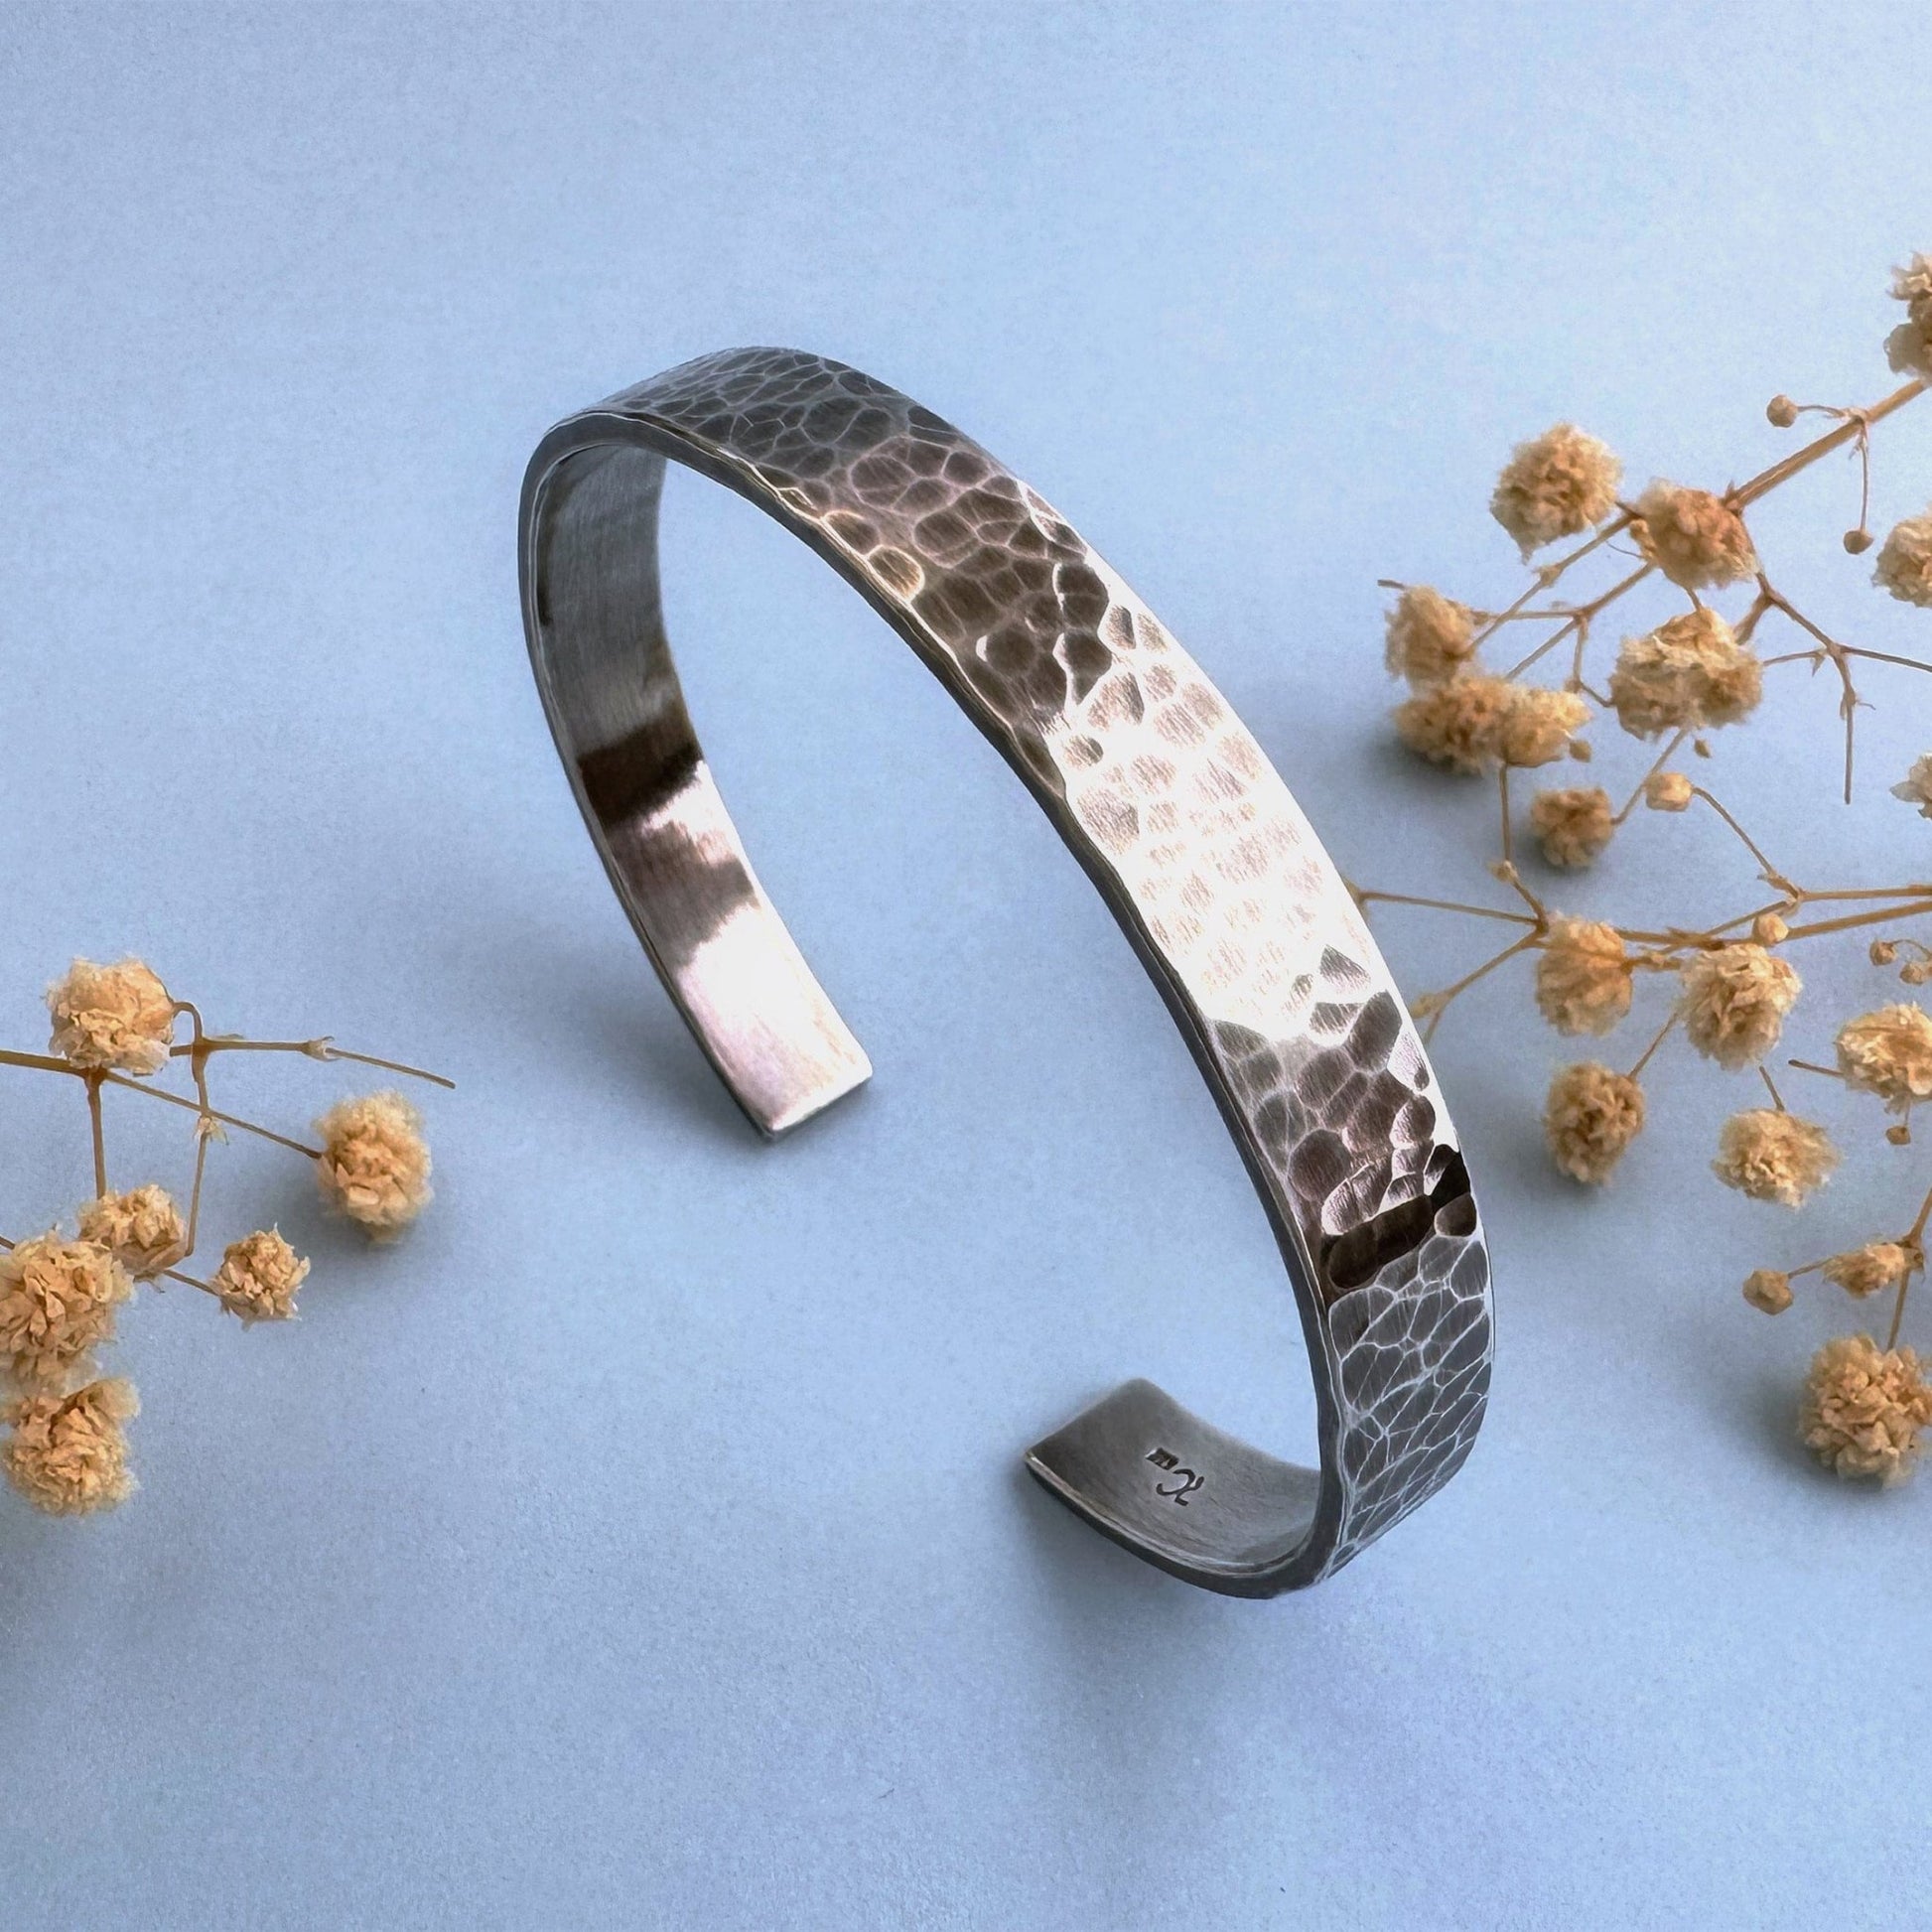 A heavy, hammered/beaten sterling silver cuff bracelet with a blackened finish is standing on a pale blue background. There are cream coloured dried flowers on either side of it.